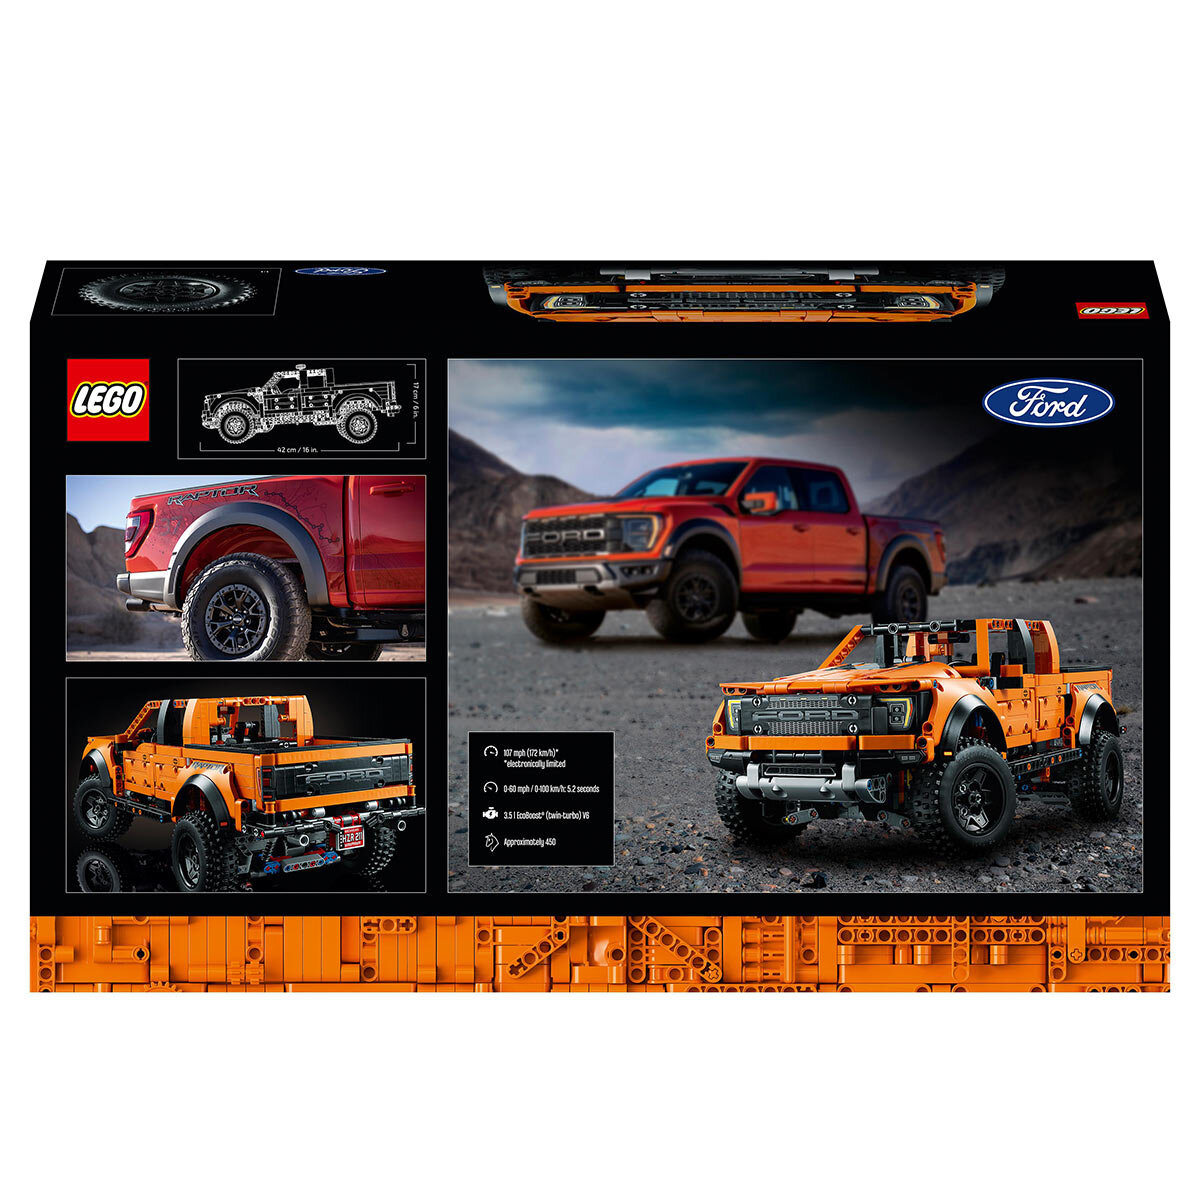 Buy LEGO Technic Ford Raptor Back of Box Image at Costco.co.uk